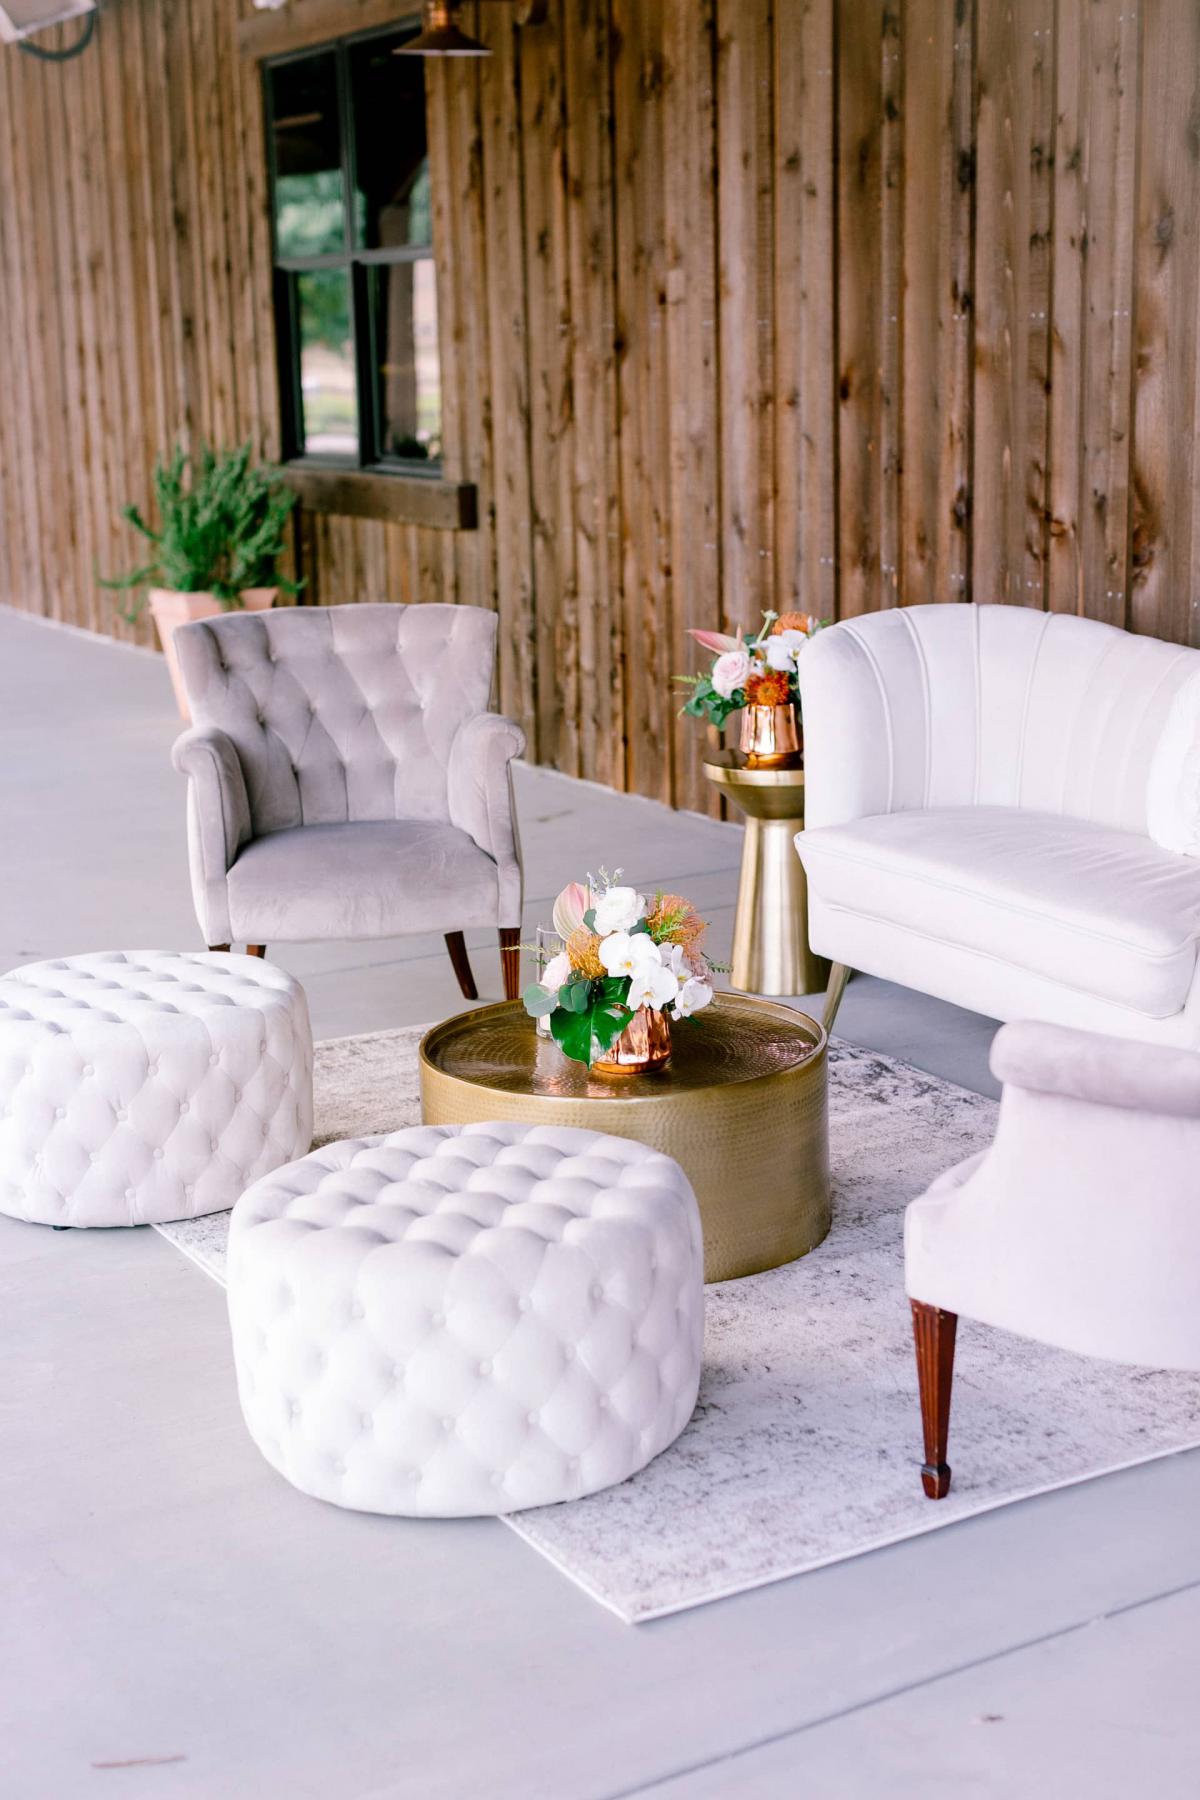 Side Angle of Outdoor Setting with Couch, 2 Chairs, Coffee Table and Poofs for Mika & James's Wedding